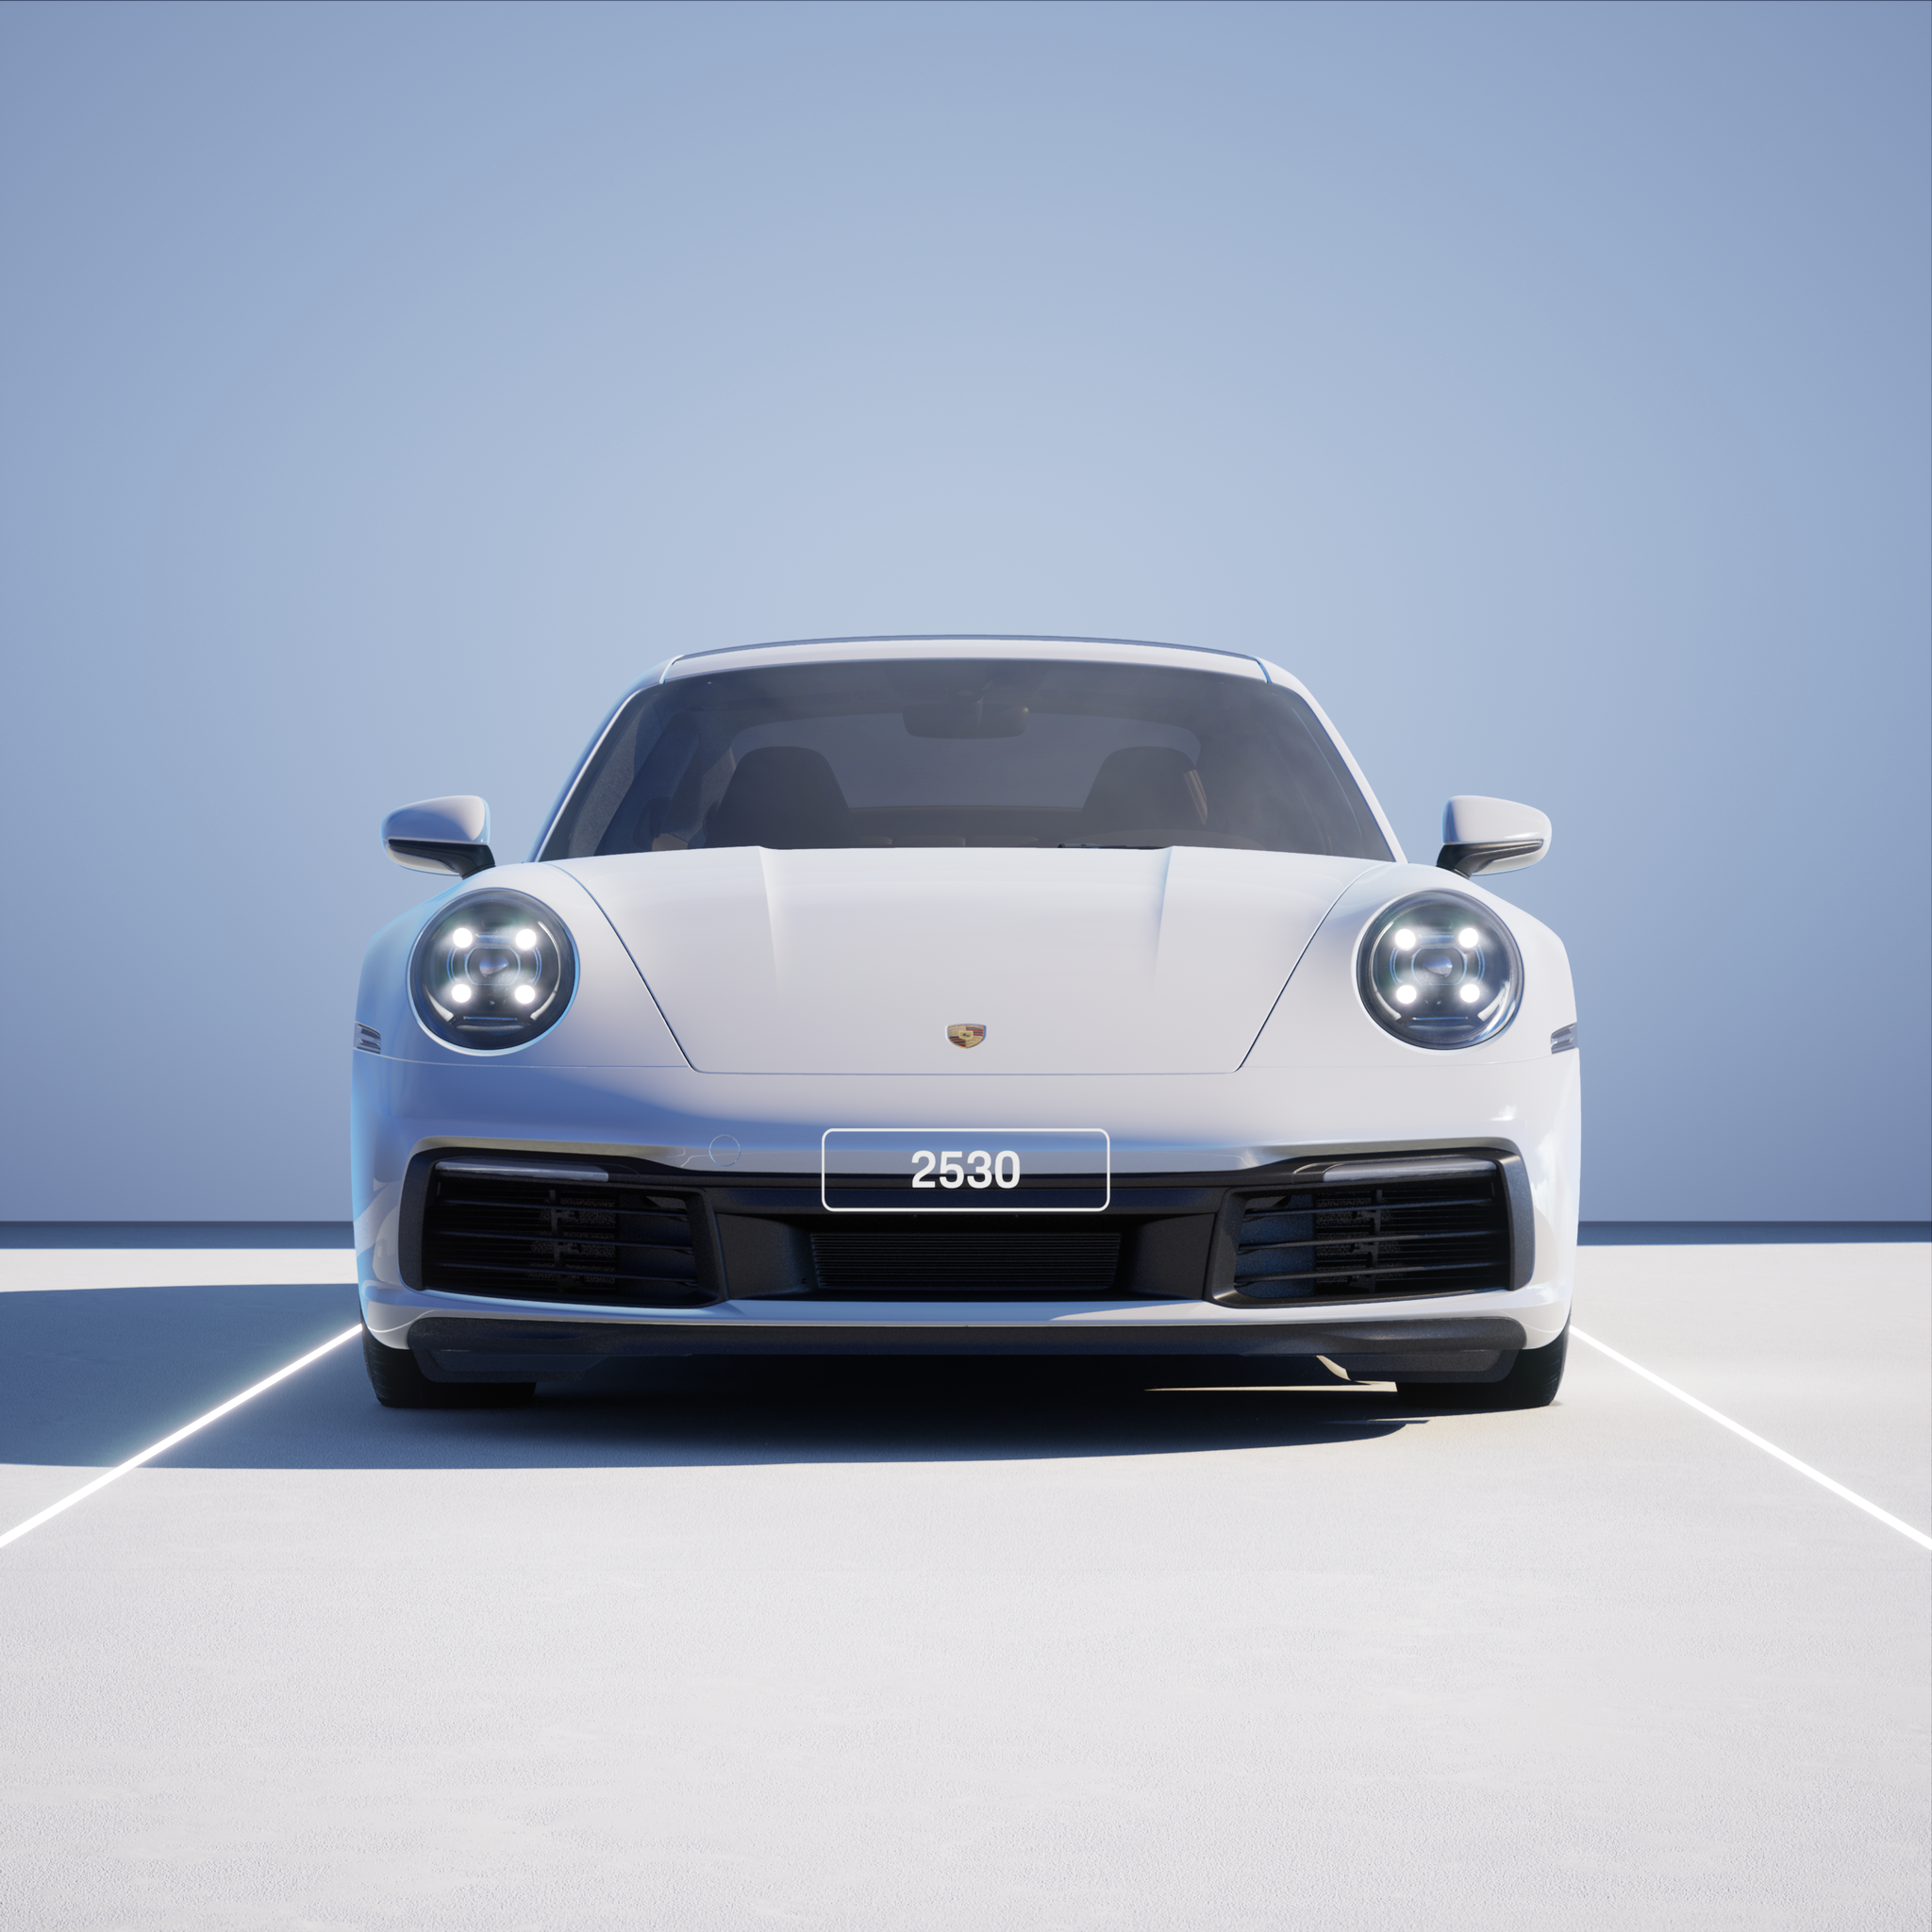 The PORSCHΞ 911 2530 image in phase